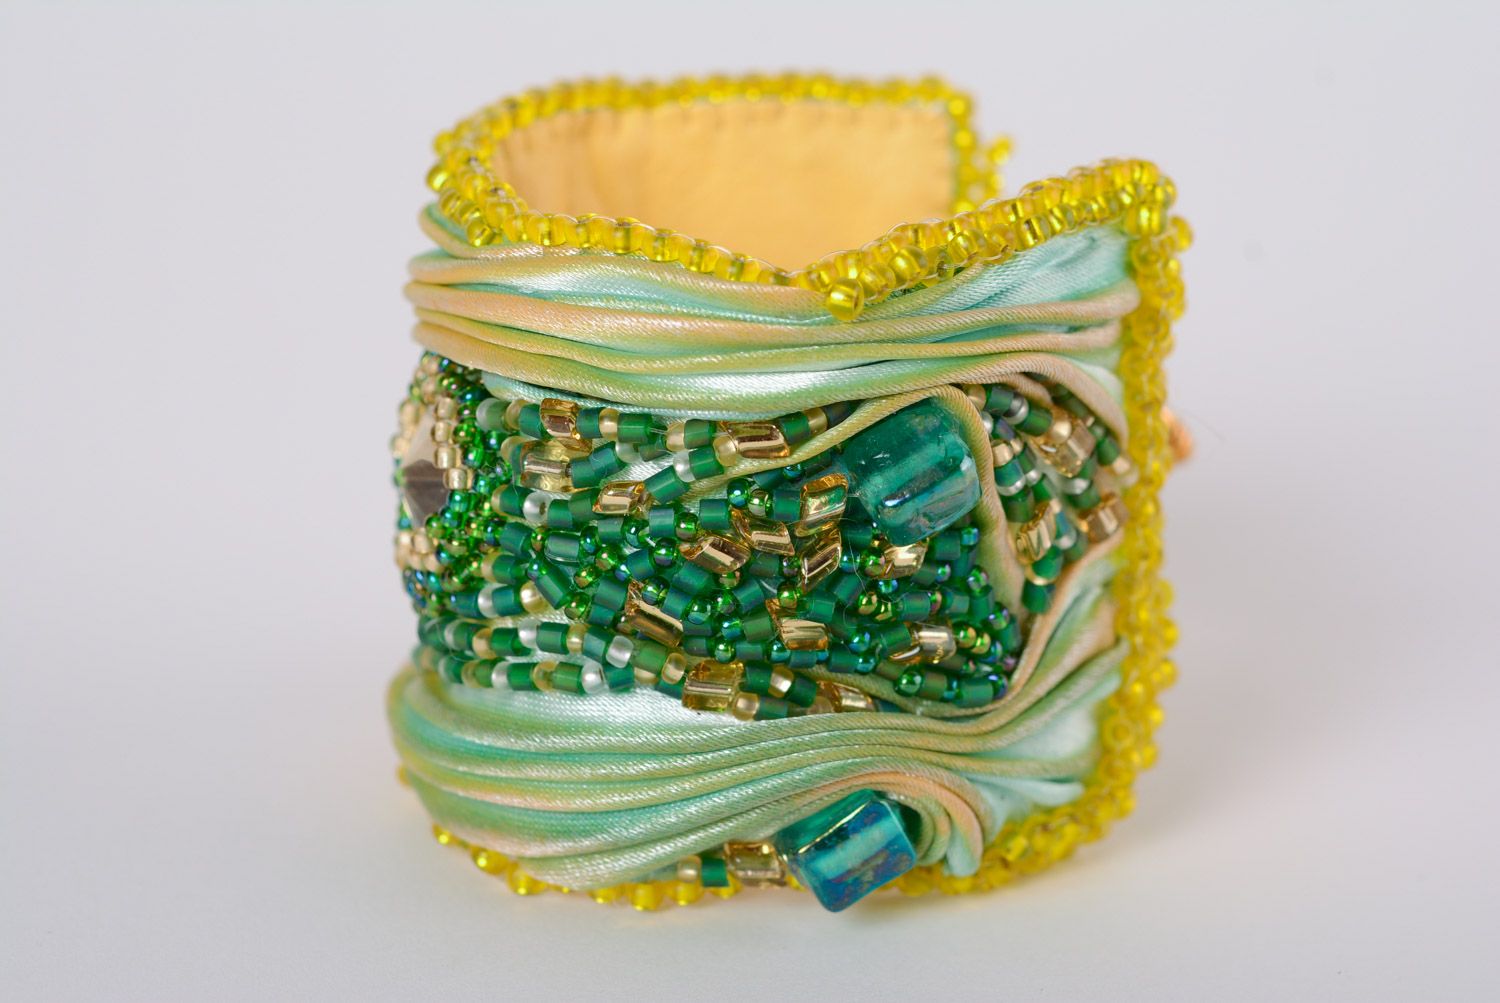 Artificial leather cuff wide bracelet decorated with small and large green beads. Great gift for mom photo 1